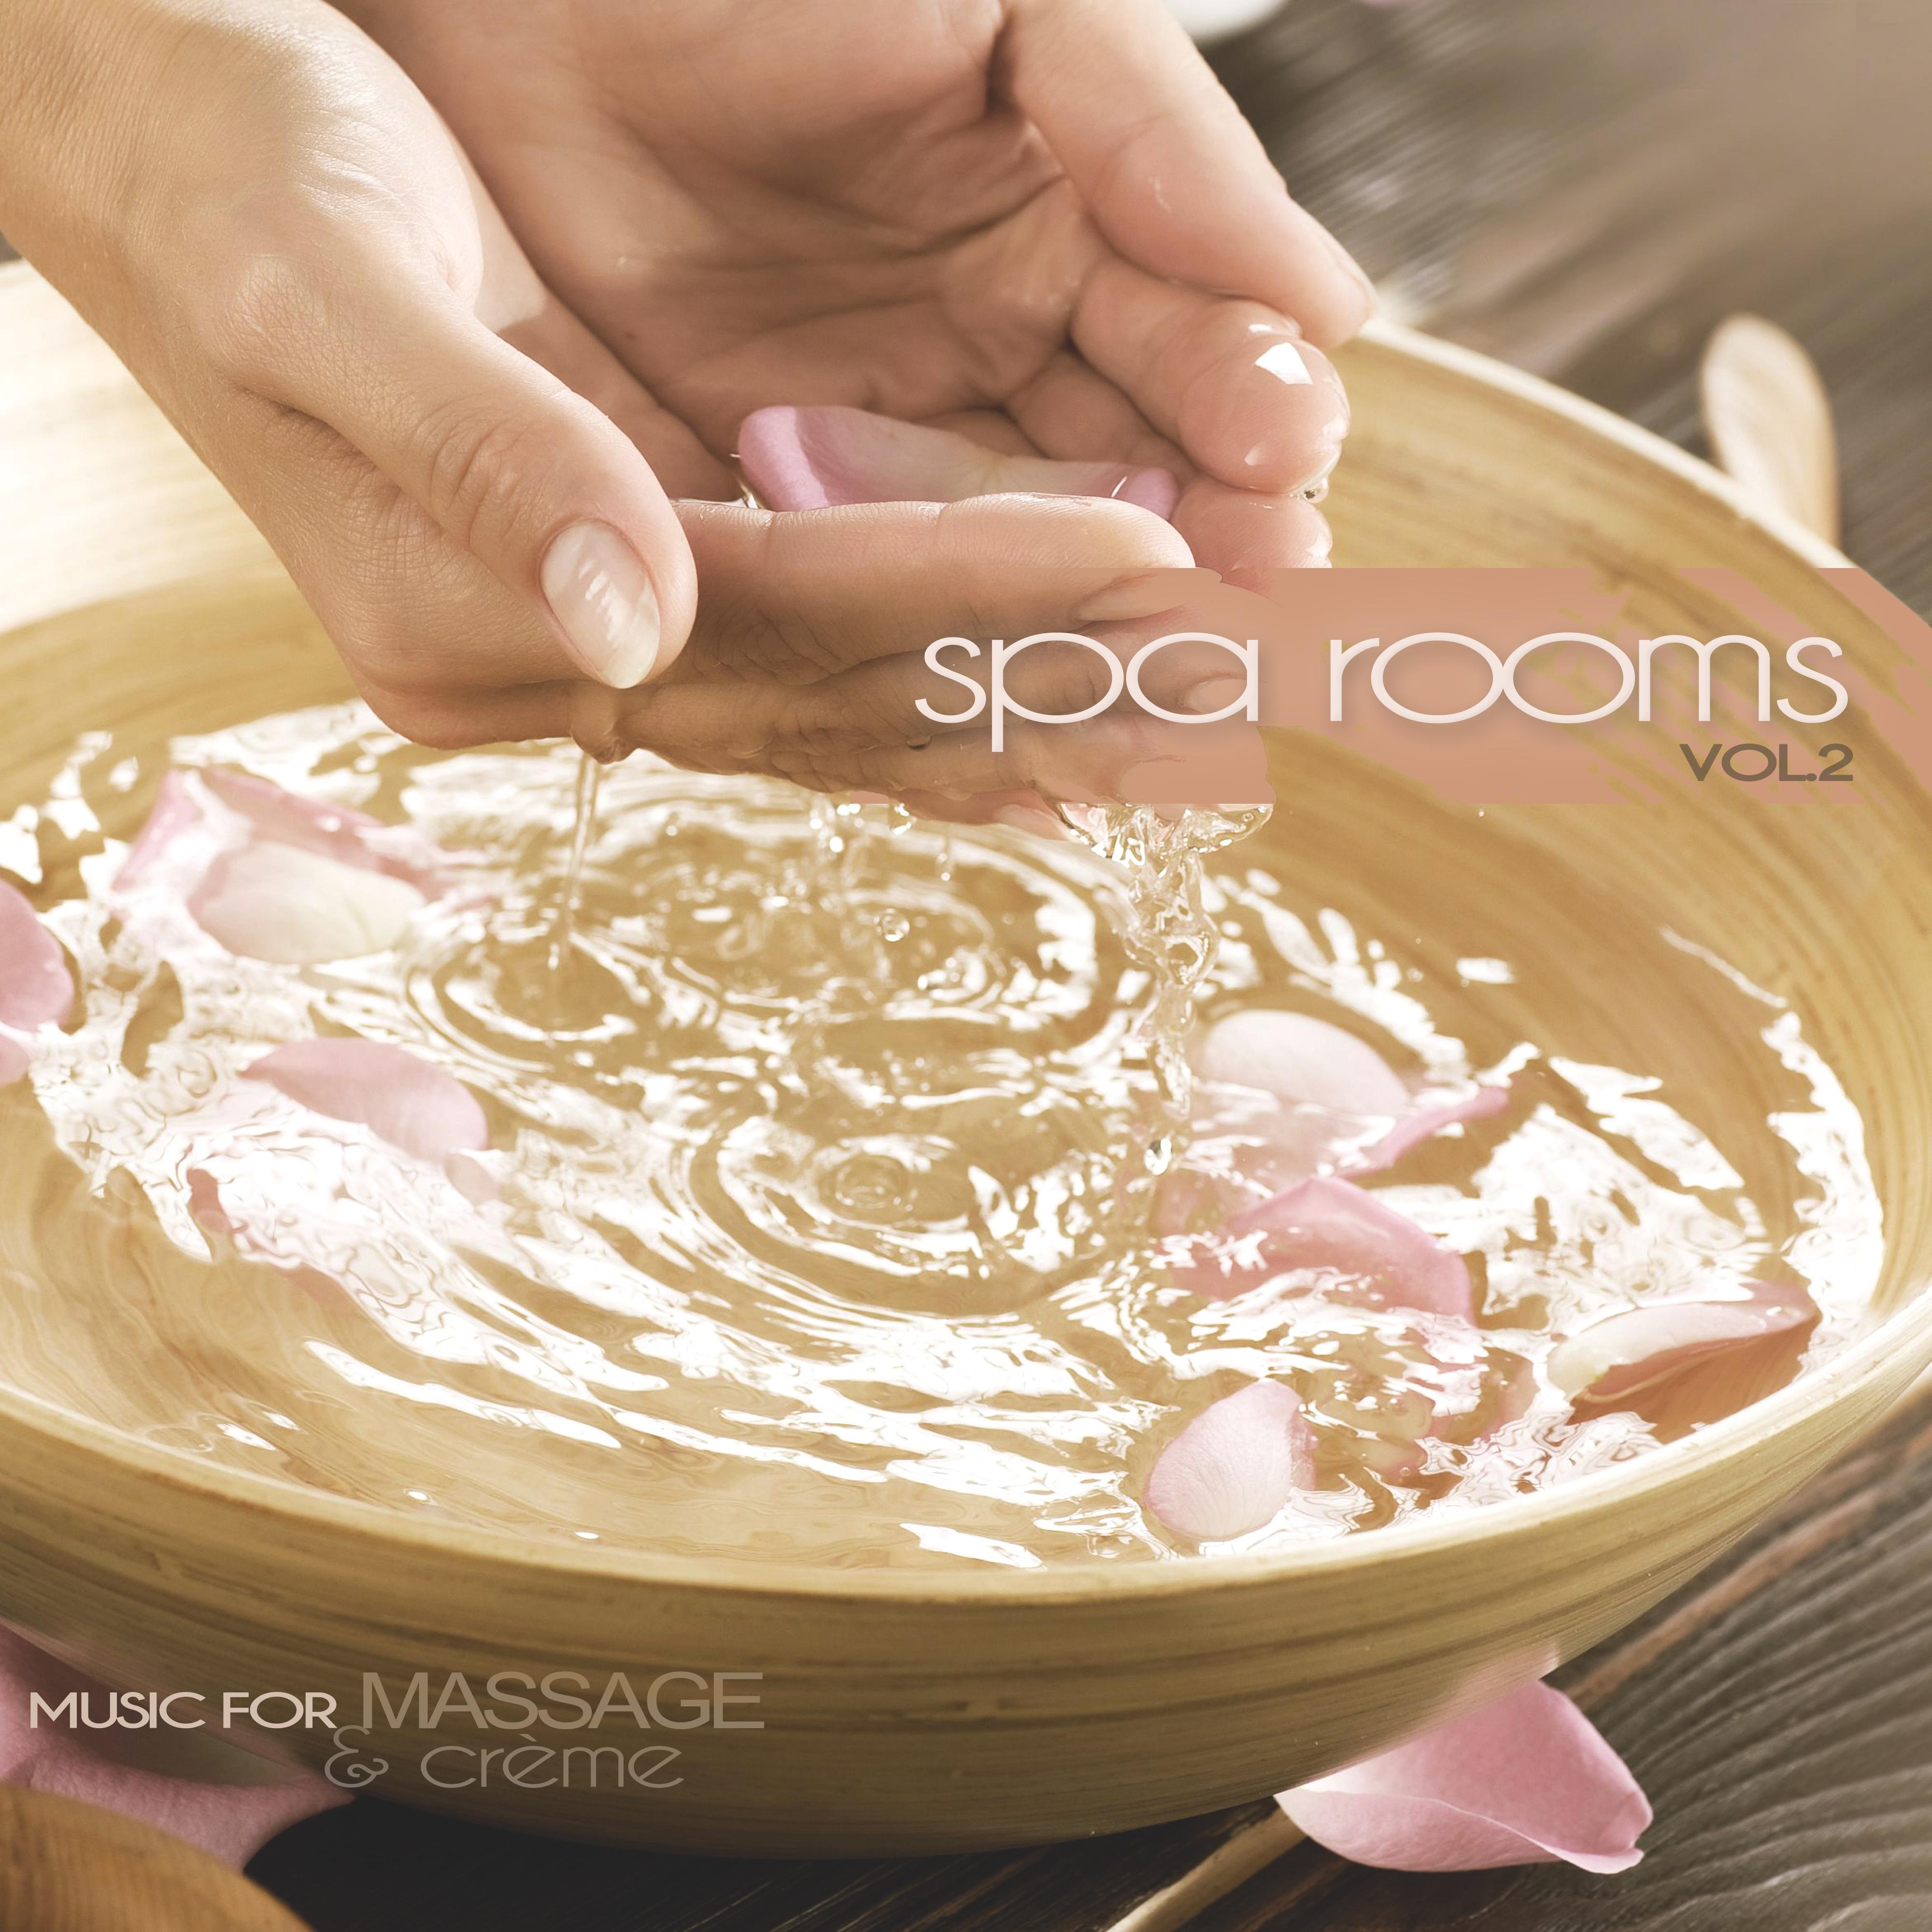 Spa Rooms, Vol. 2 (Music for Massage & Creme)